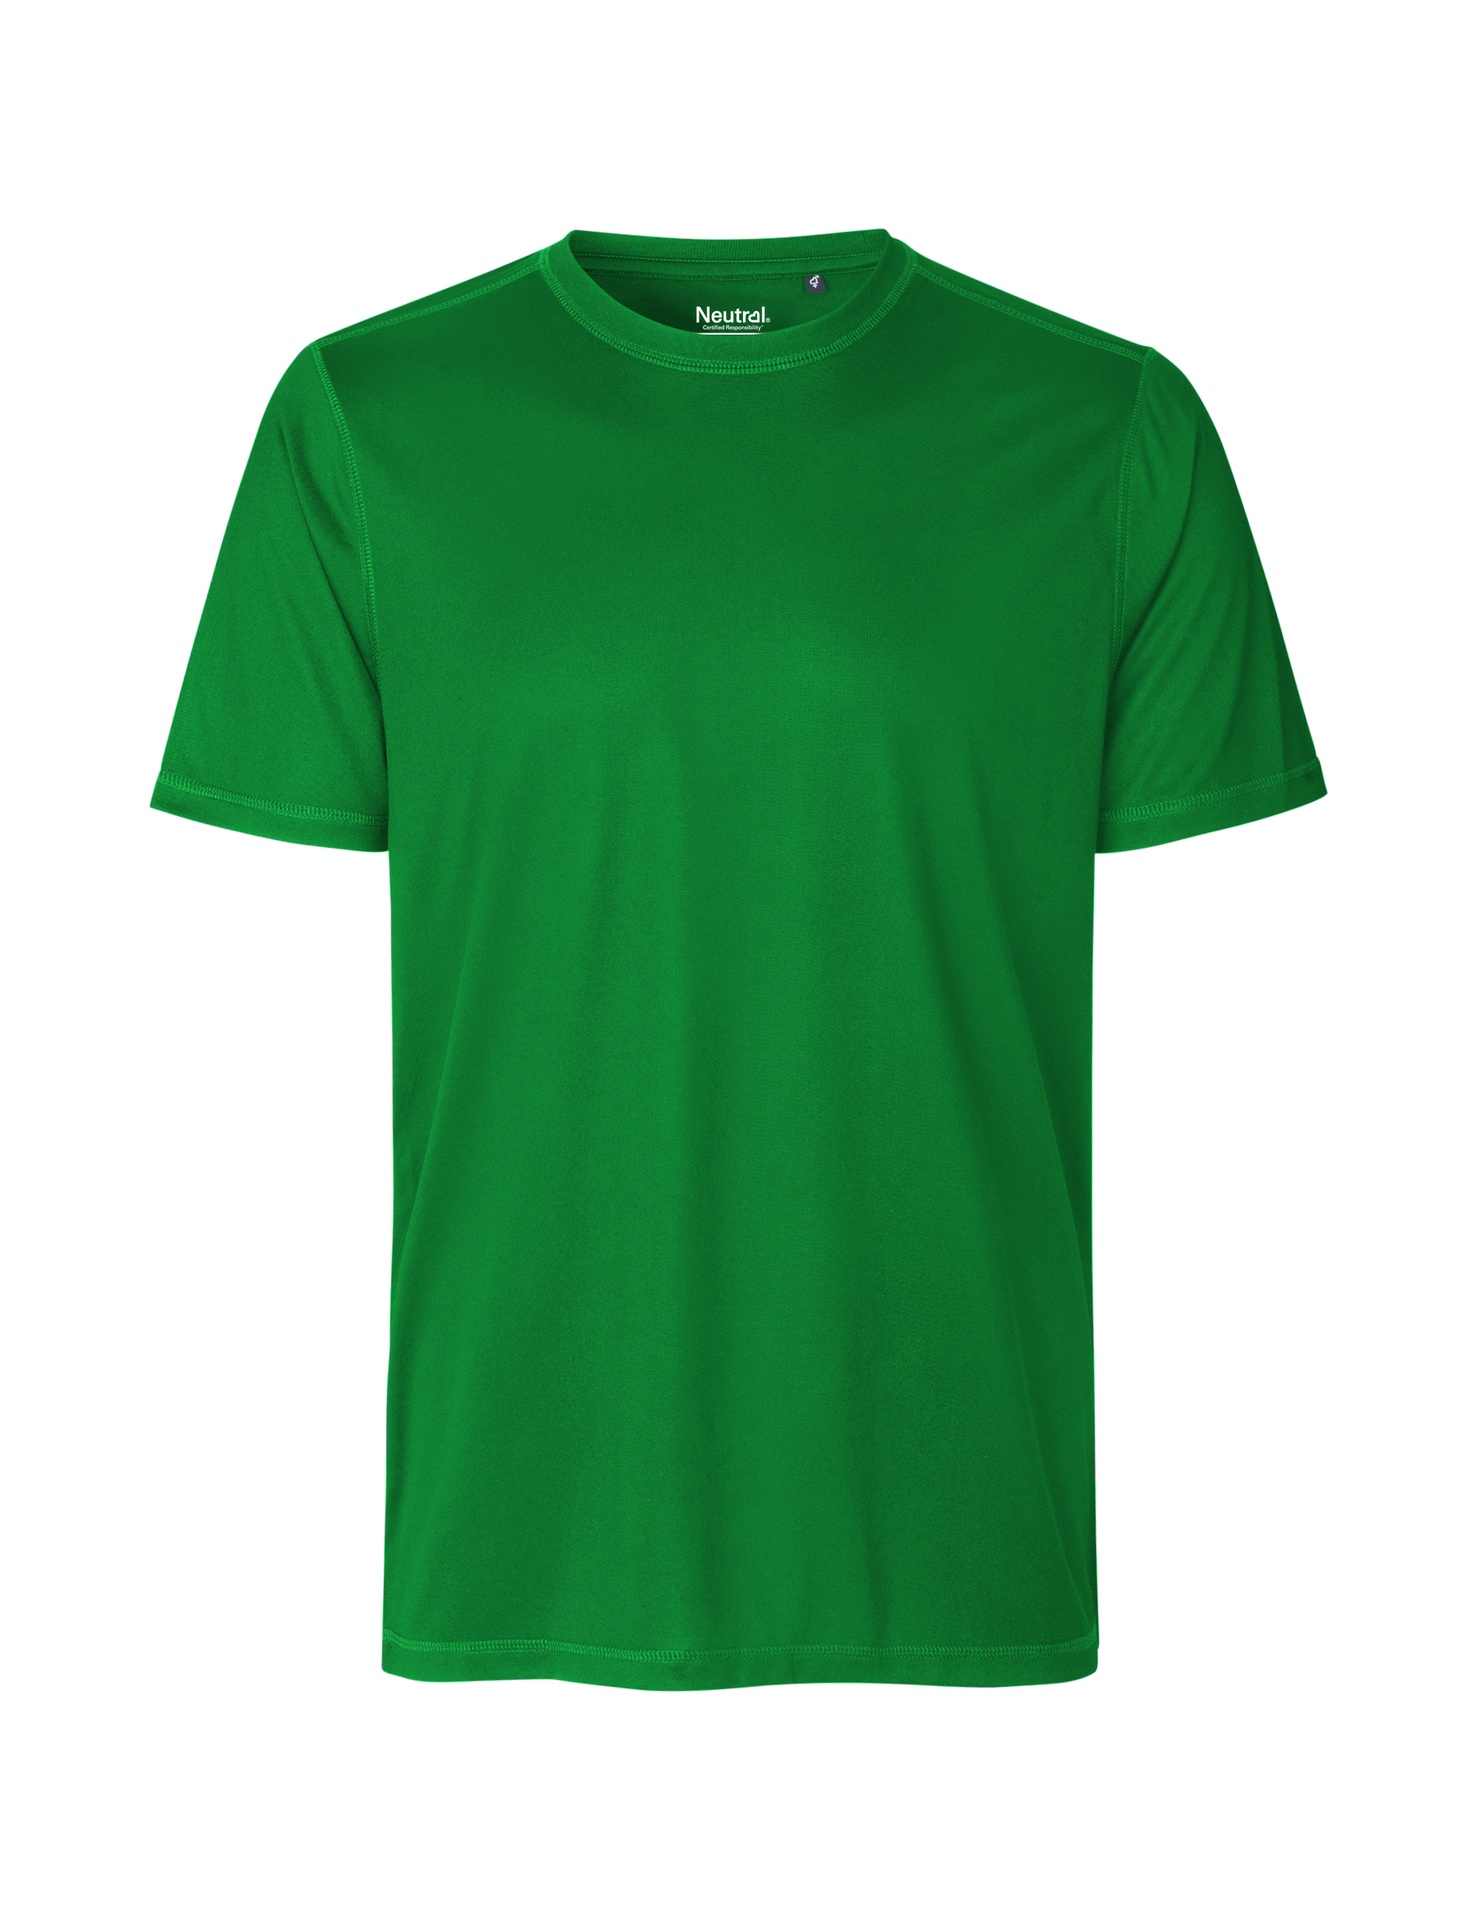 [PR/03808] Recycled Performance T-Shirt (Green 67, S)